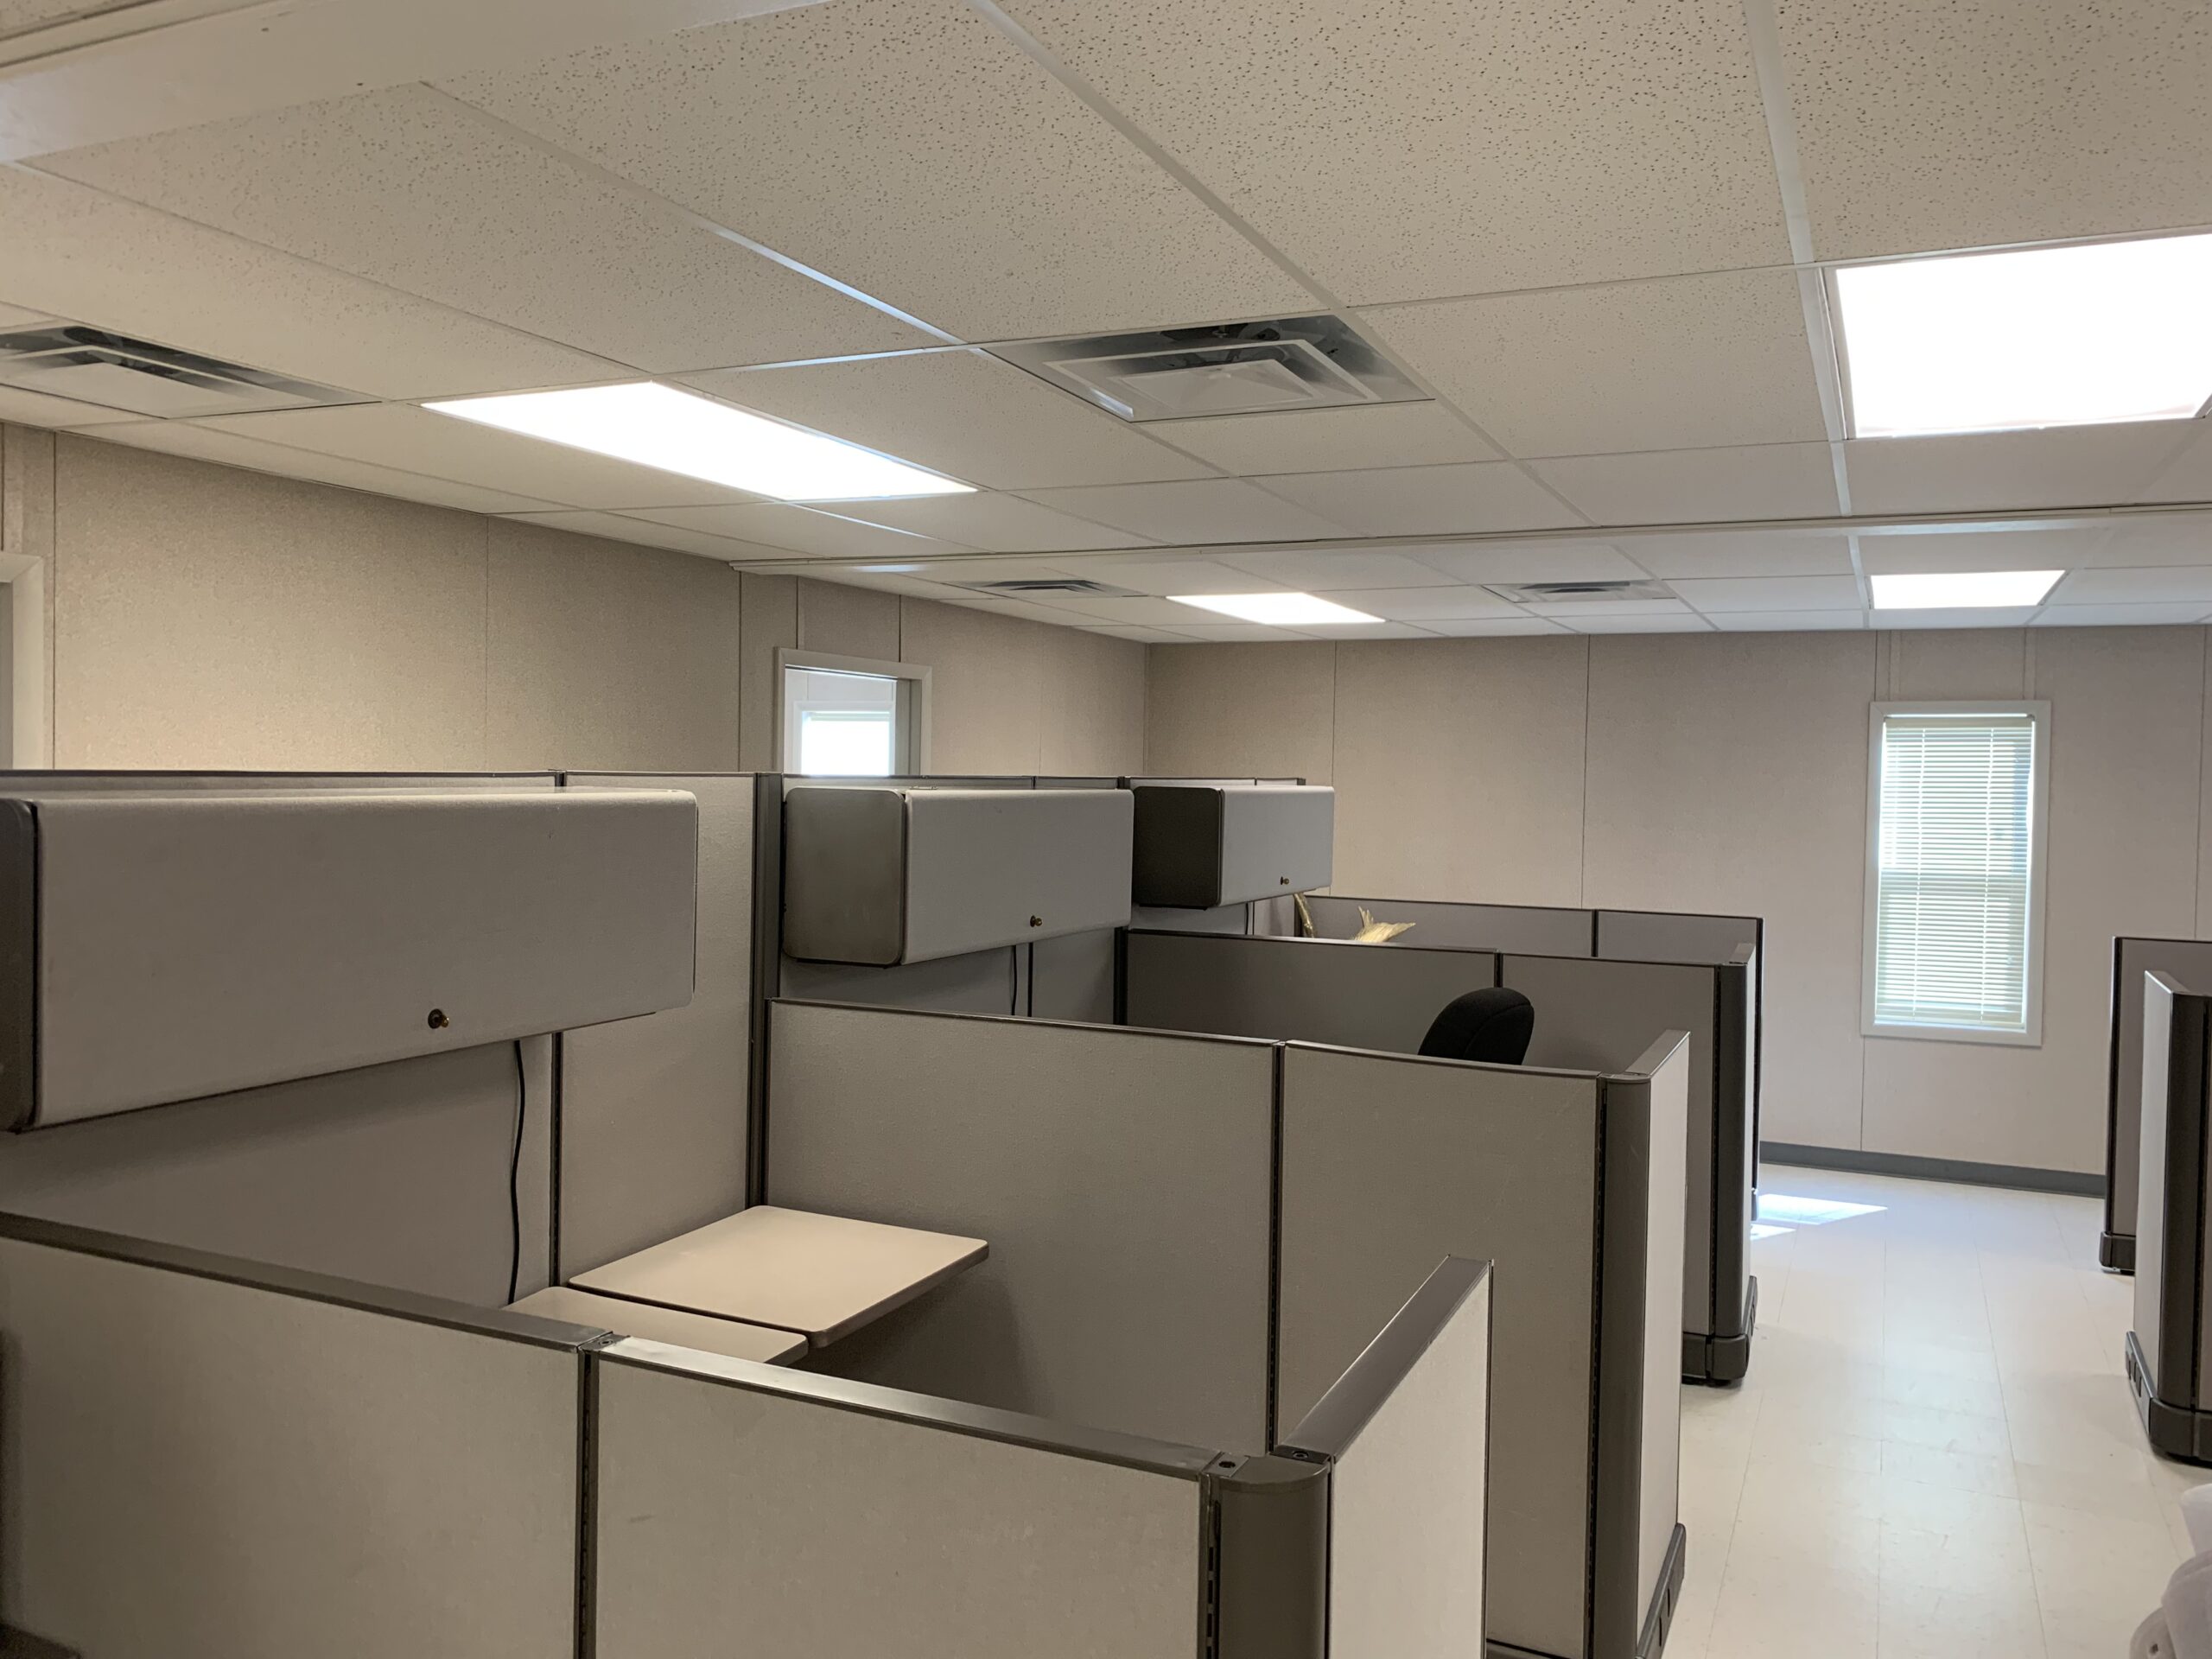 Interior of modular office spaces and work cubicles in the S-Plex Modular Swing Space Project.